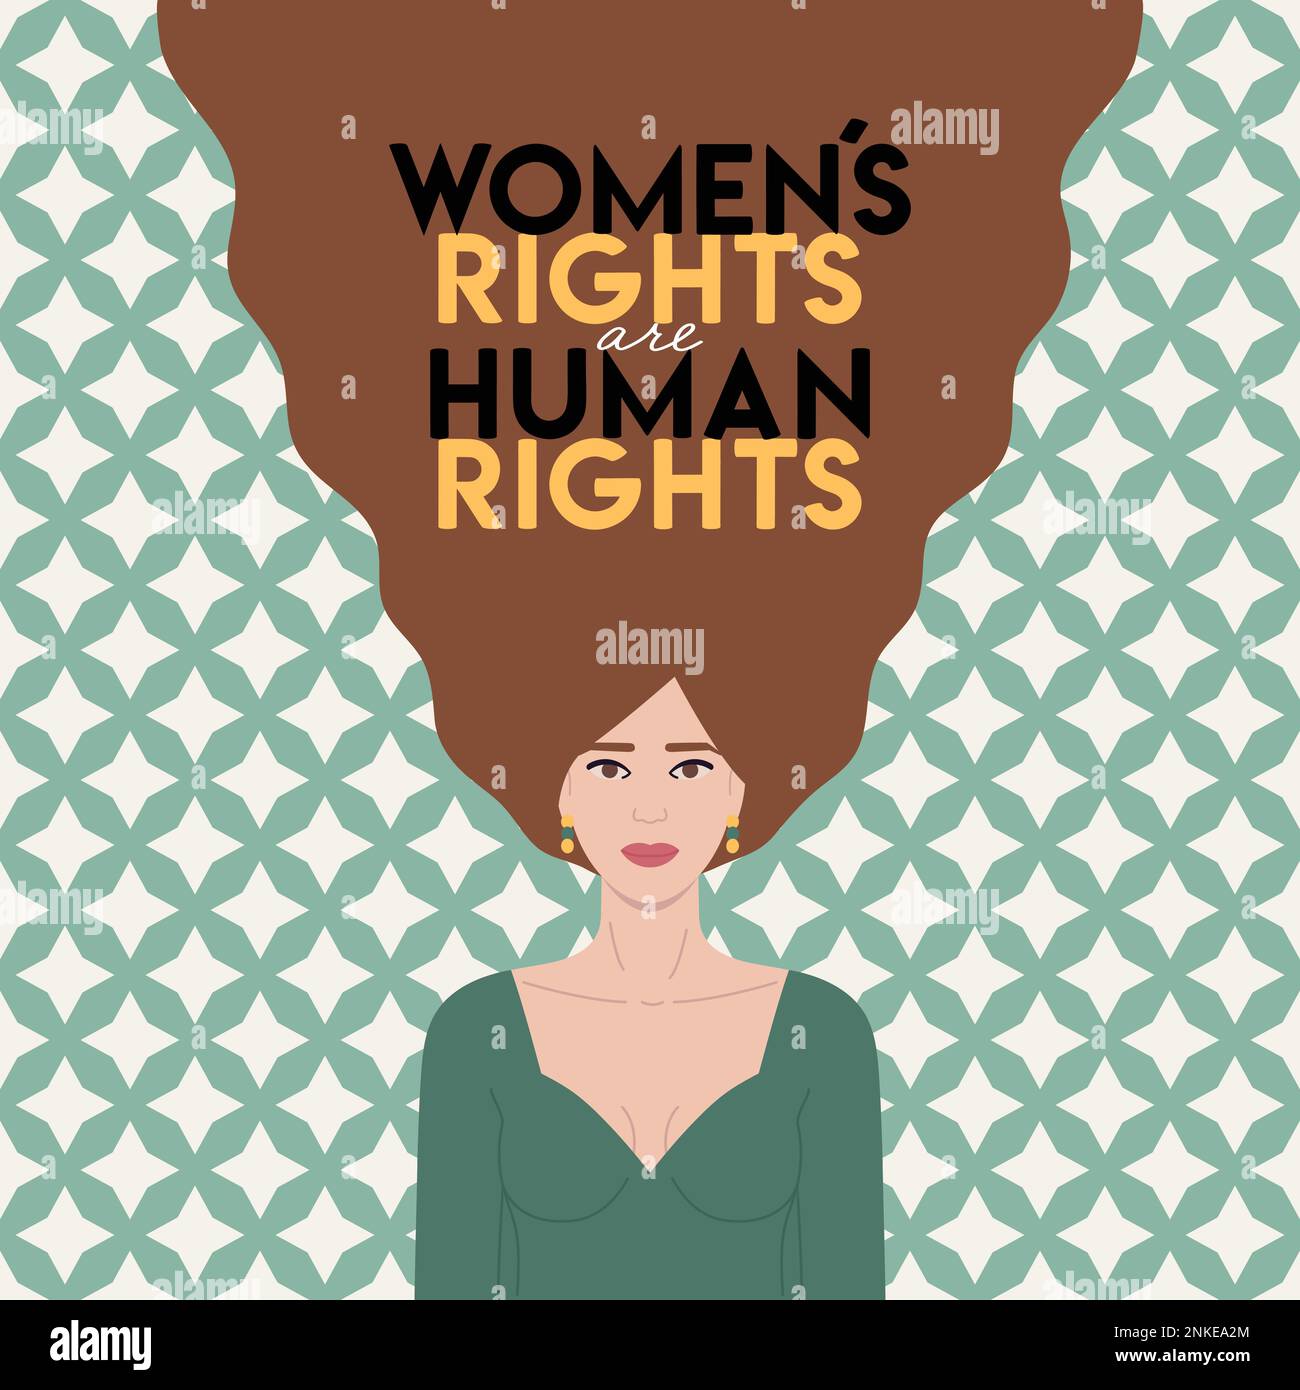 Women s rights are human rights lettering on brown hair caucasian woman in retro groovy style. Woman empowerment, equality, feminism. International Wo Stock Vector